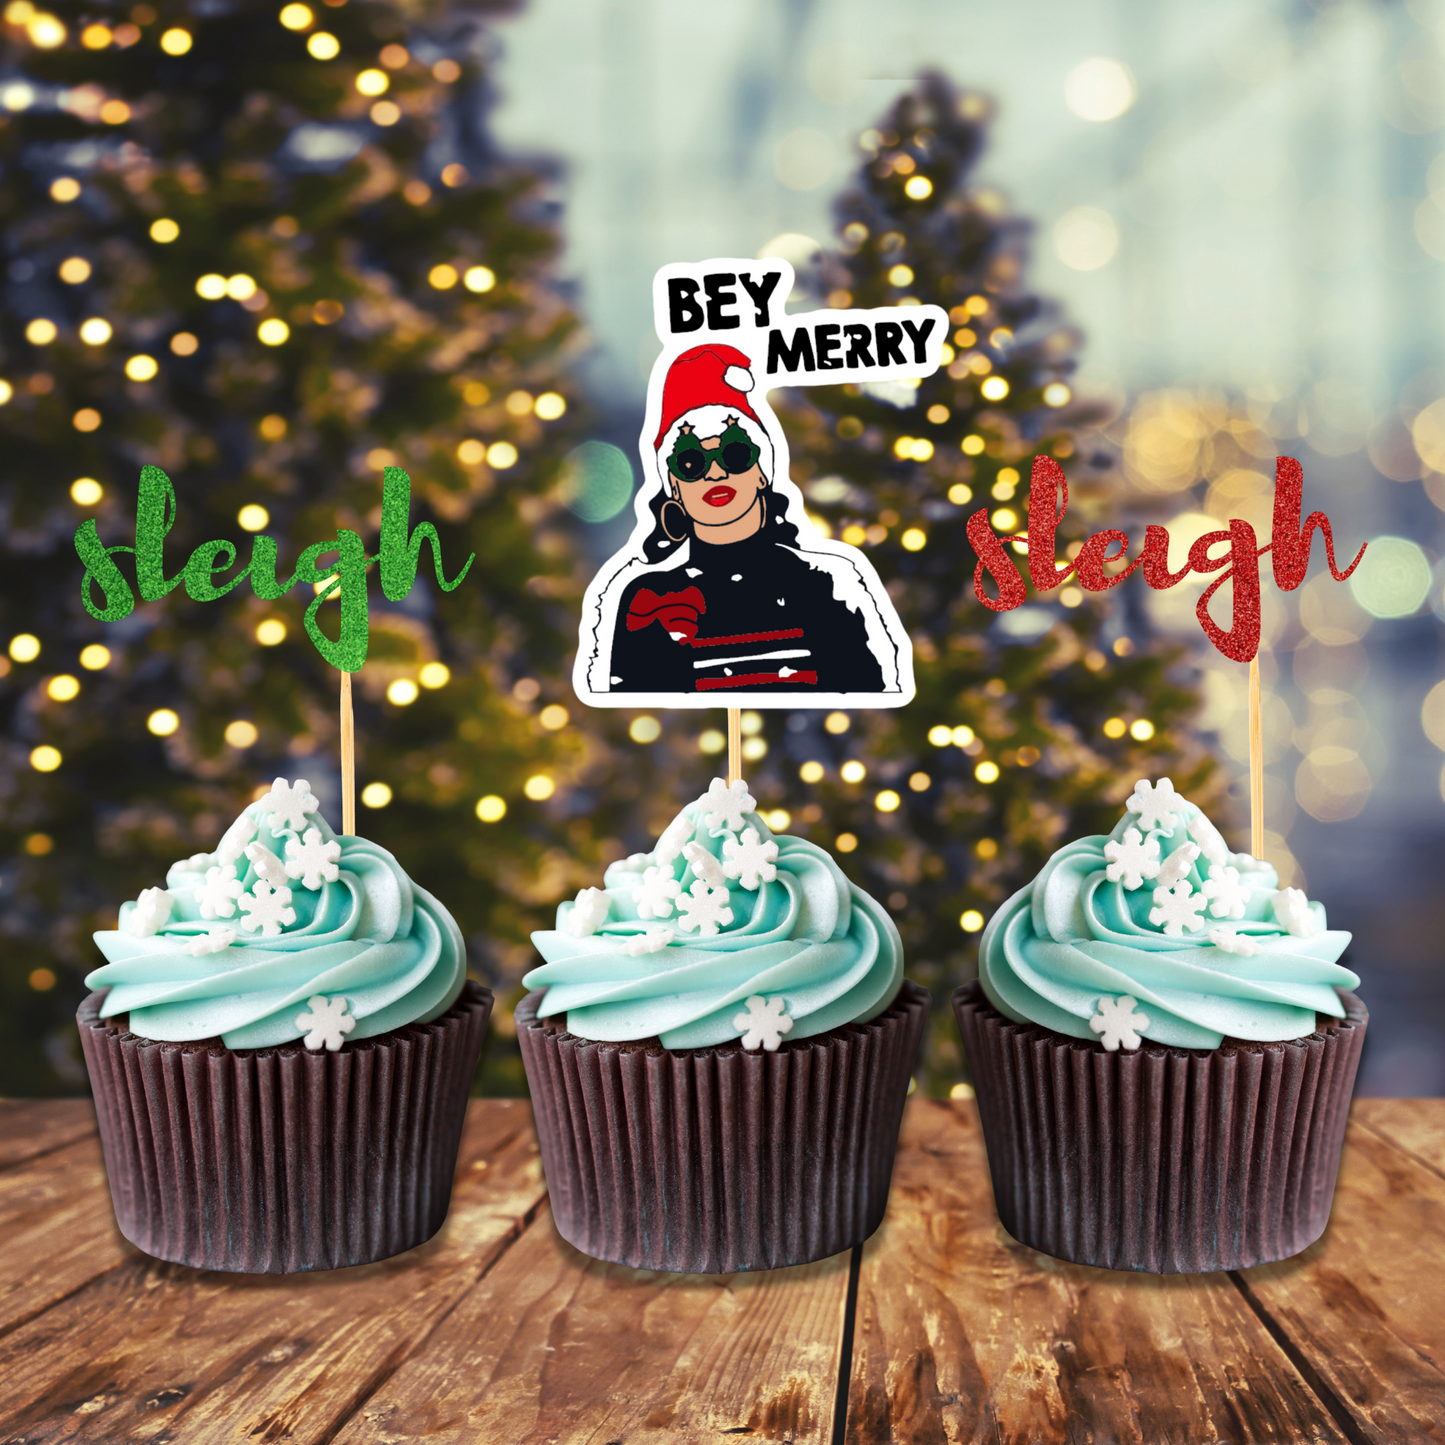 Bey Merry & Sleigh Cupcake Toppers